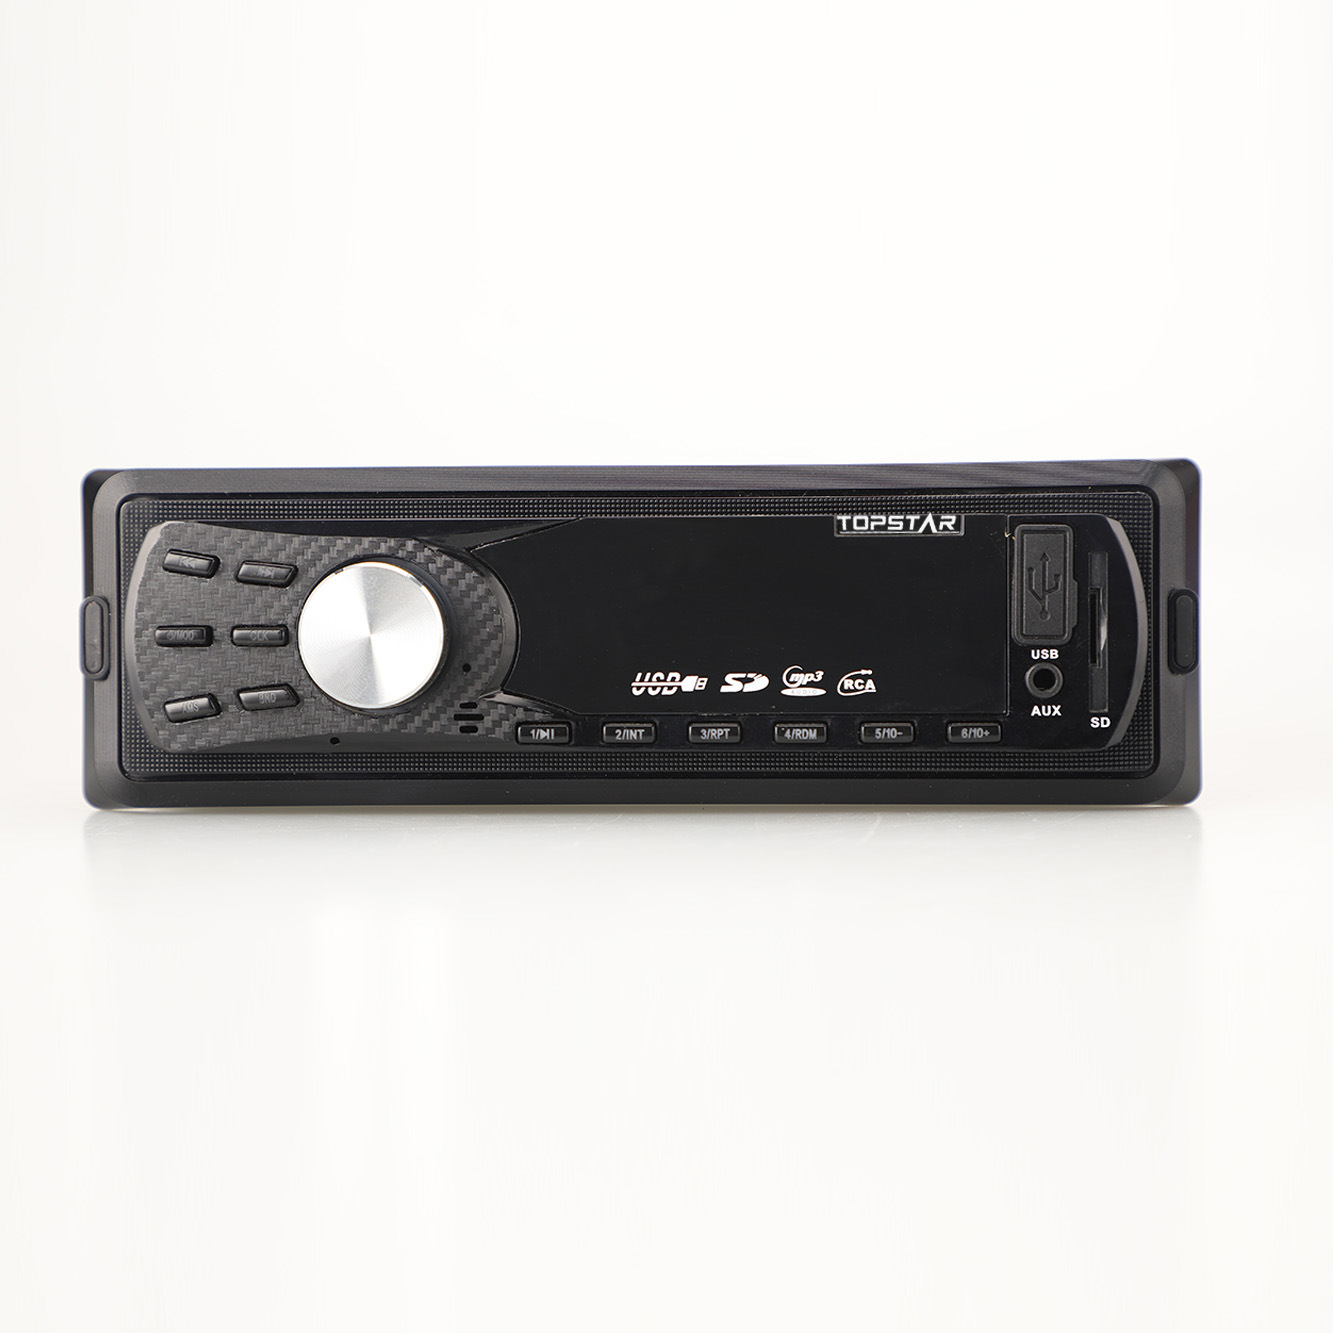 MP3 Player for Car Stereo Car Video Player Car MP3 Audio Car Radio Good Quality One DIN Car Player with Bluetooth